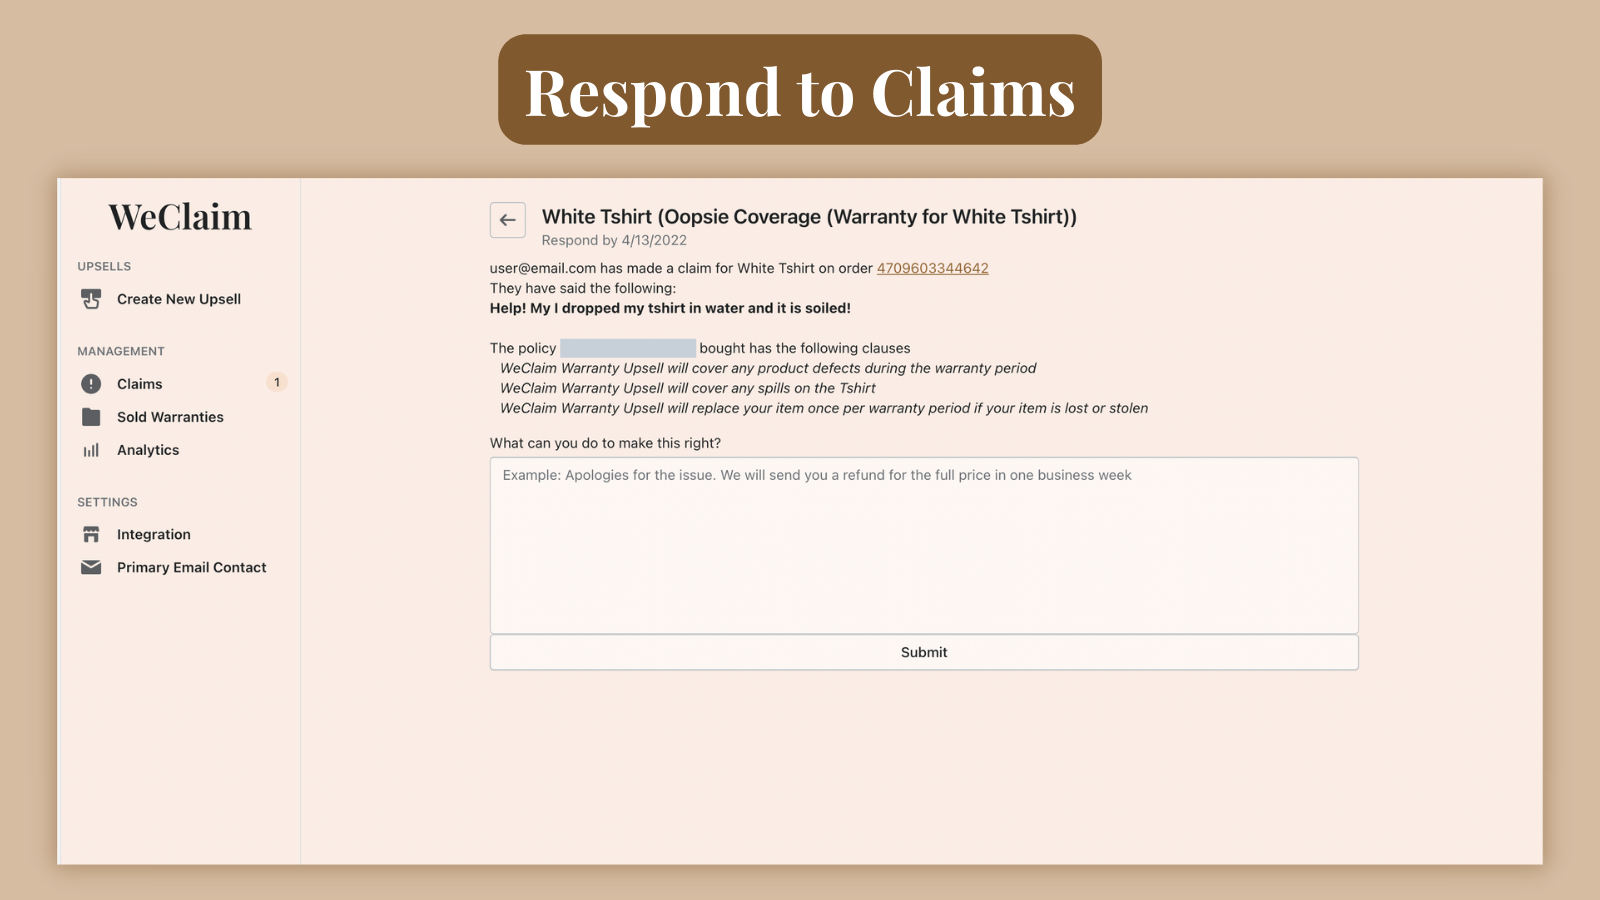 Respond to Claims